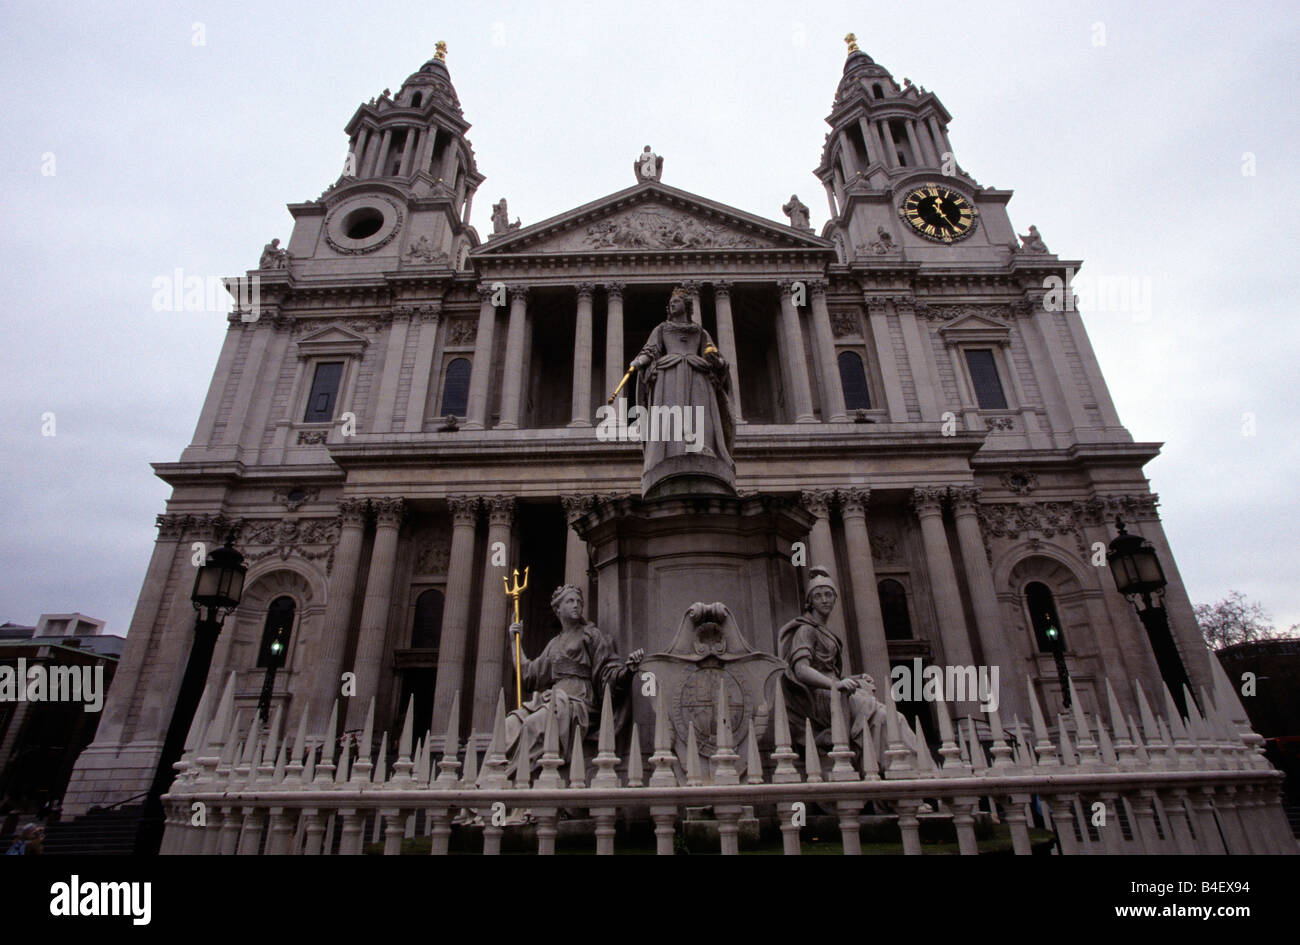 St Paul's Cathedral on Ludgate Hill, London, England, UK Stock Photo